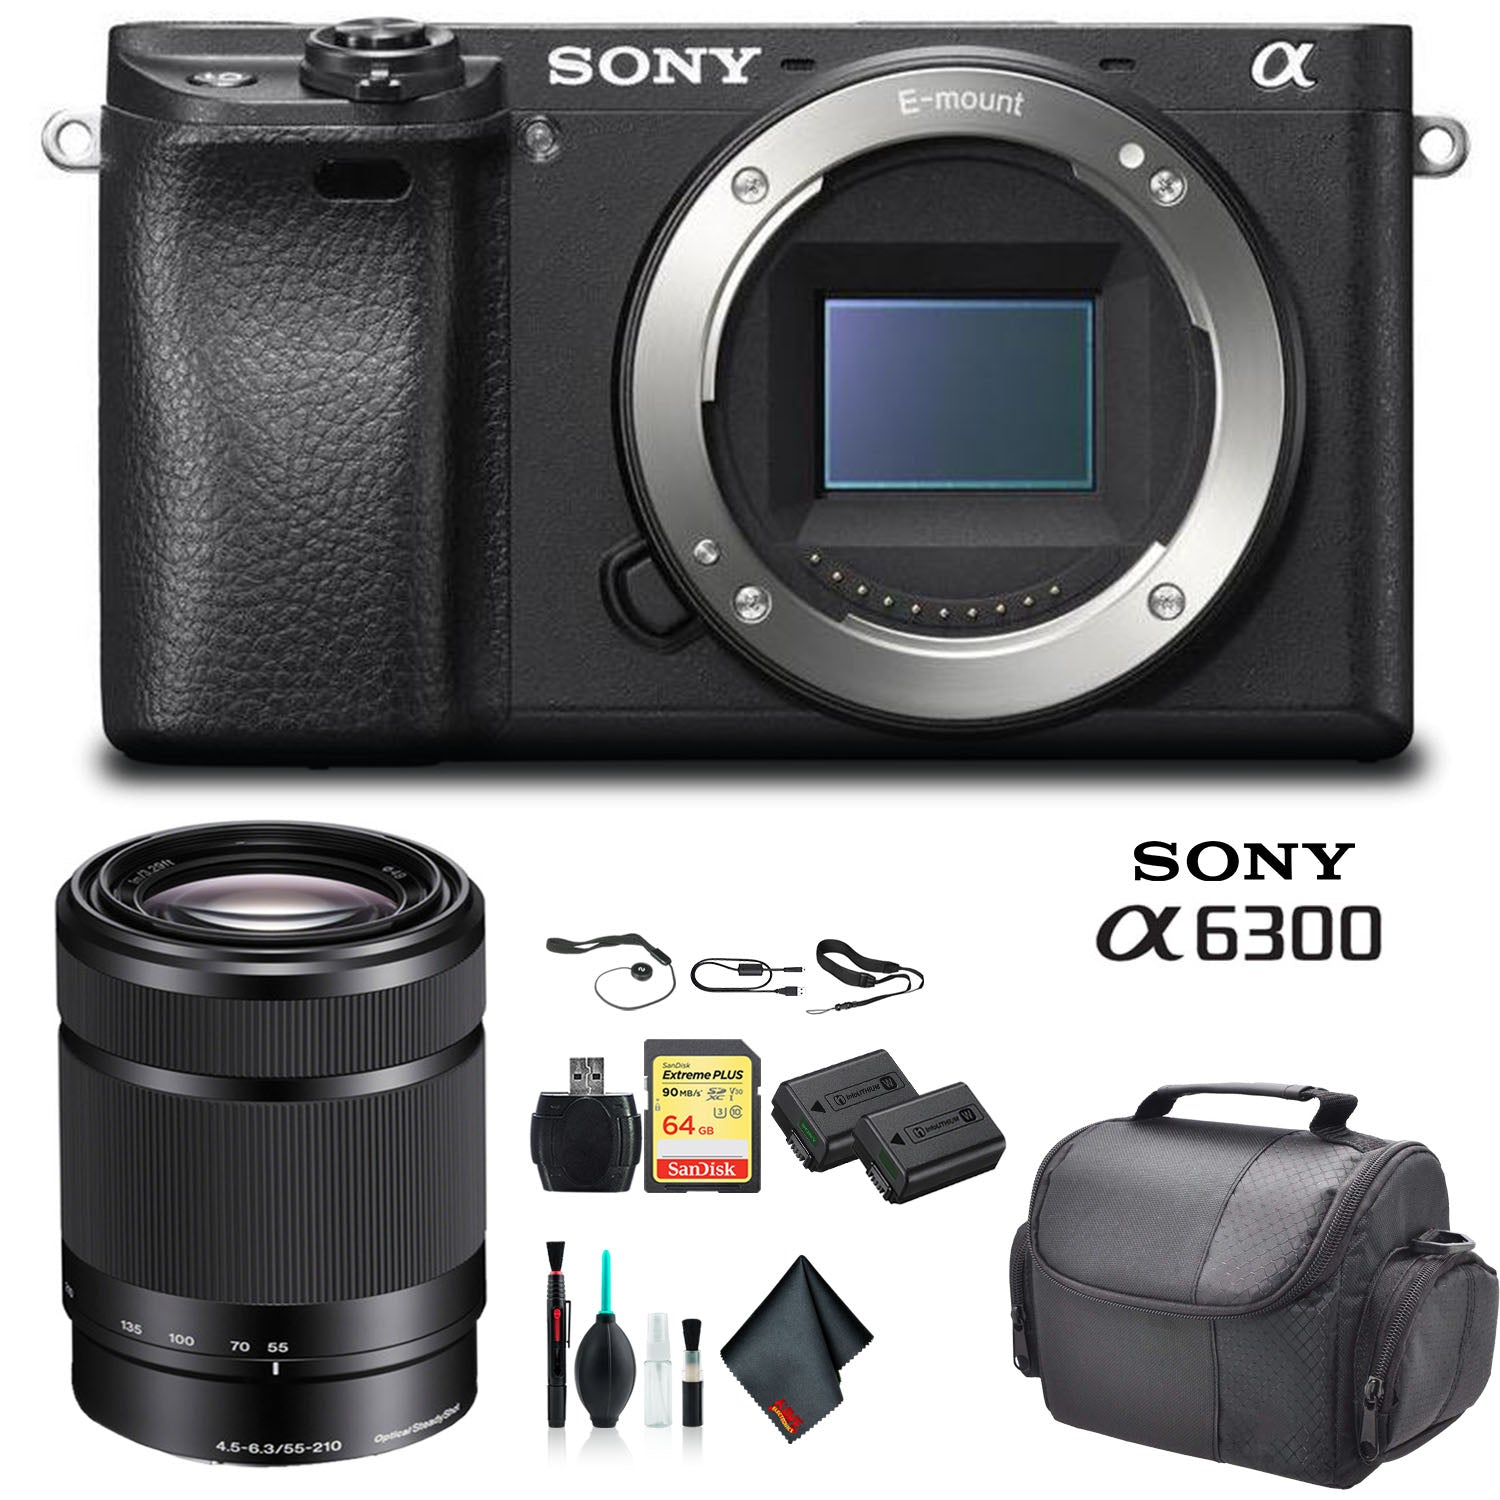 Sony Alpha a6300 Mirrorless Camera Black ILCE6300/B With Sony 55-210mm Lens, Soft Bag, Additional Battery, 64GB Memory Card, Card Reader , Plus Essential Accessories